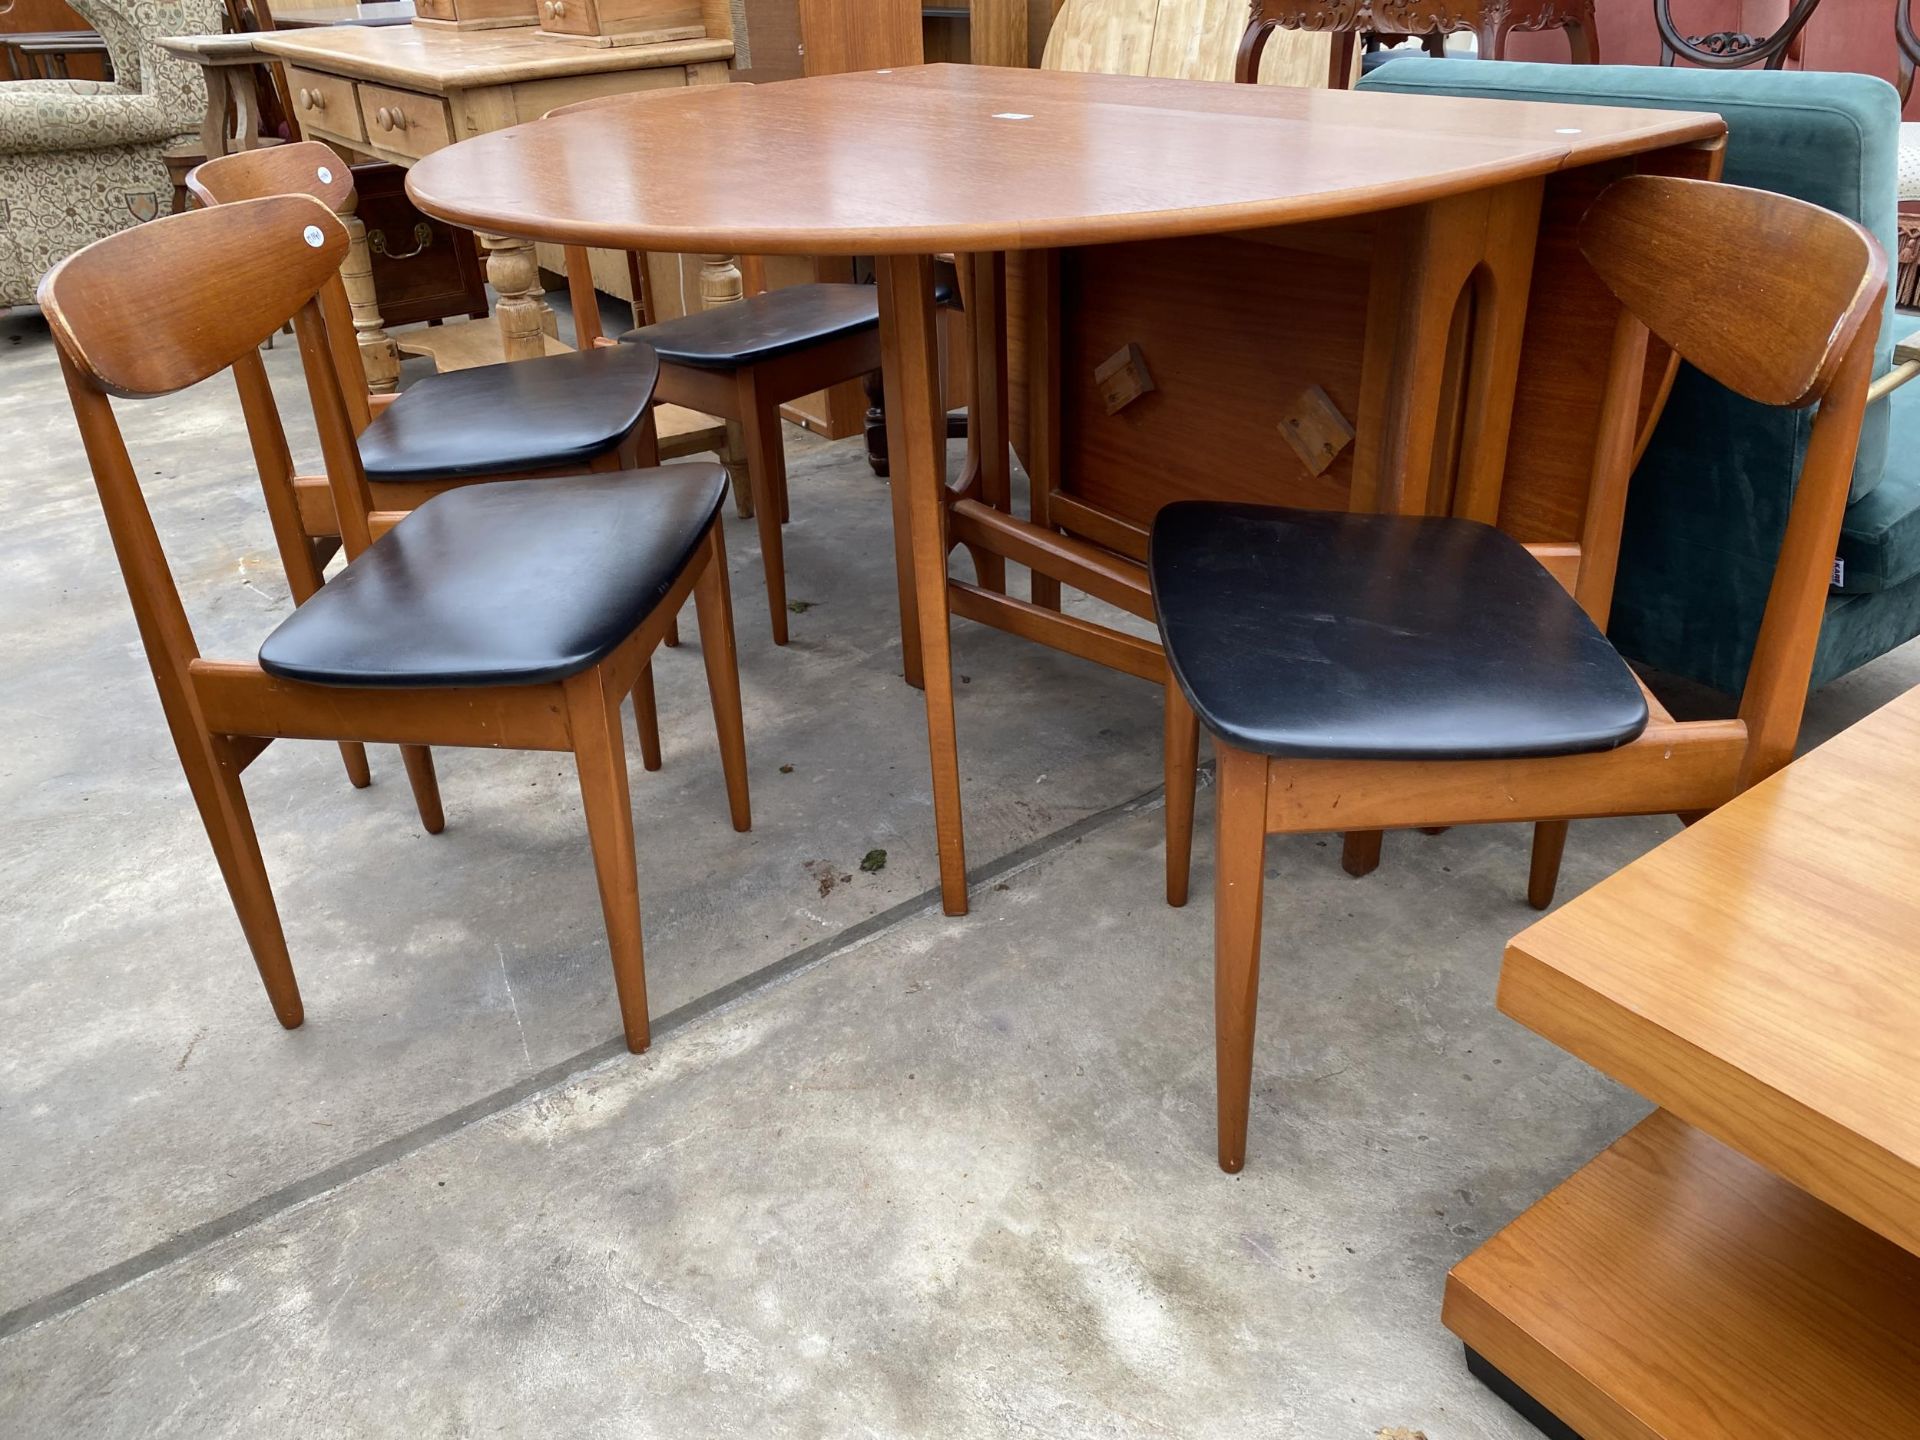 A RETRO TEAK GATELEG DINING TABLE, 60 X 42" OPENED AND FOUR DINING CHAIRS WITH BLACK FAUX LEATHER - Image 3 of 4